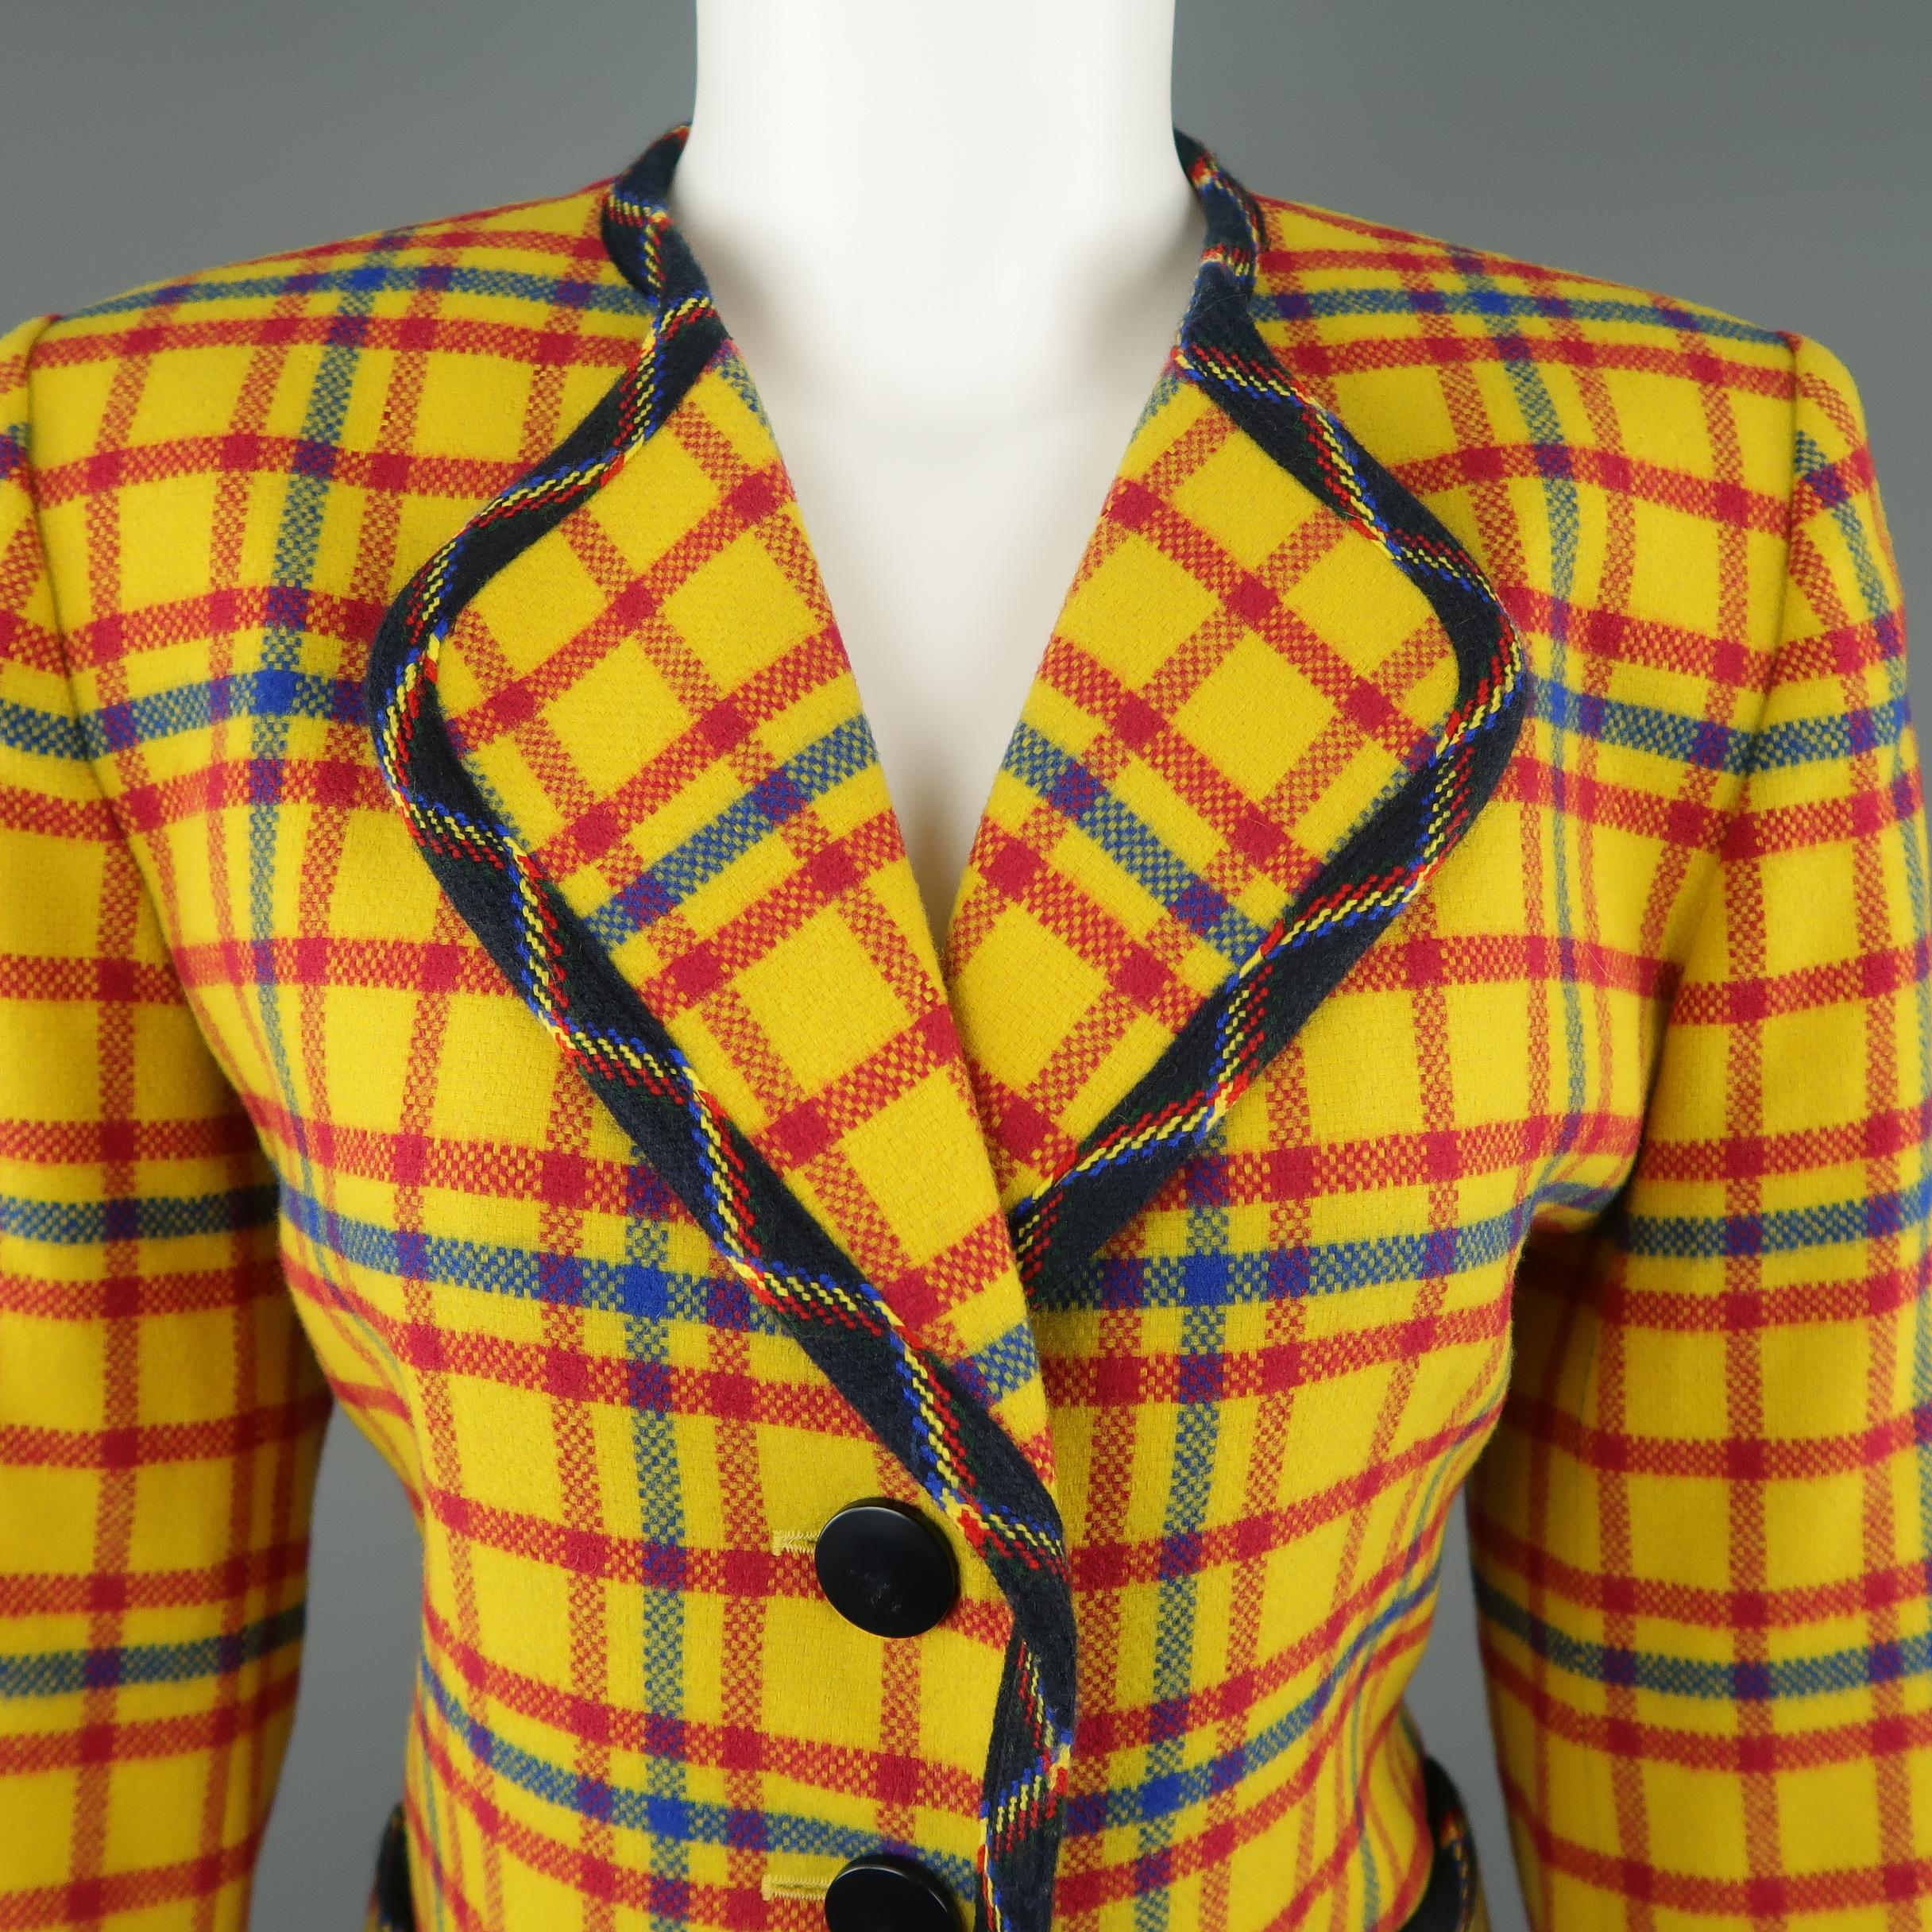 Vintage YVES SAINT LAURENT - ENCORE jacket comes in bold yellow, red, and blue plaid wool with a collarless, pointed lapel, four button front, and deep navy print piping. Minor imperfections on buttons. Made in France. .
 
Excellent Pre-Owned